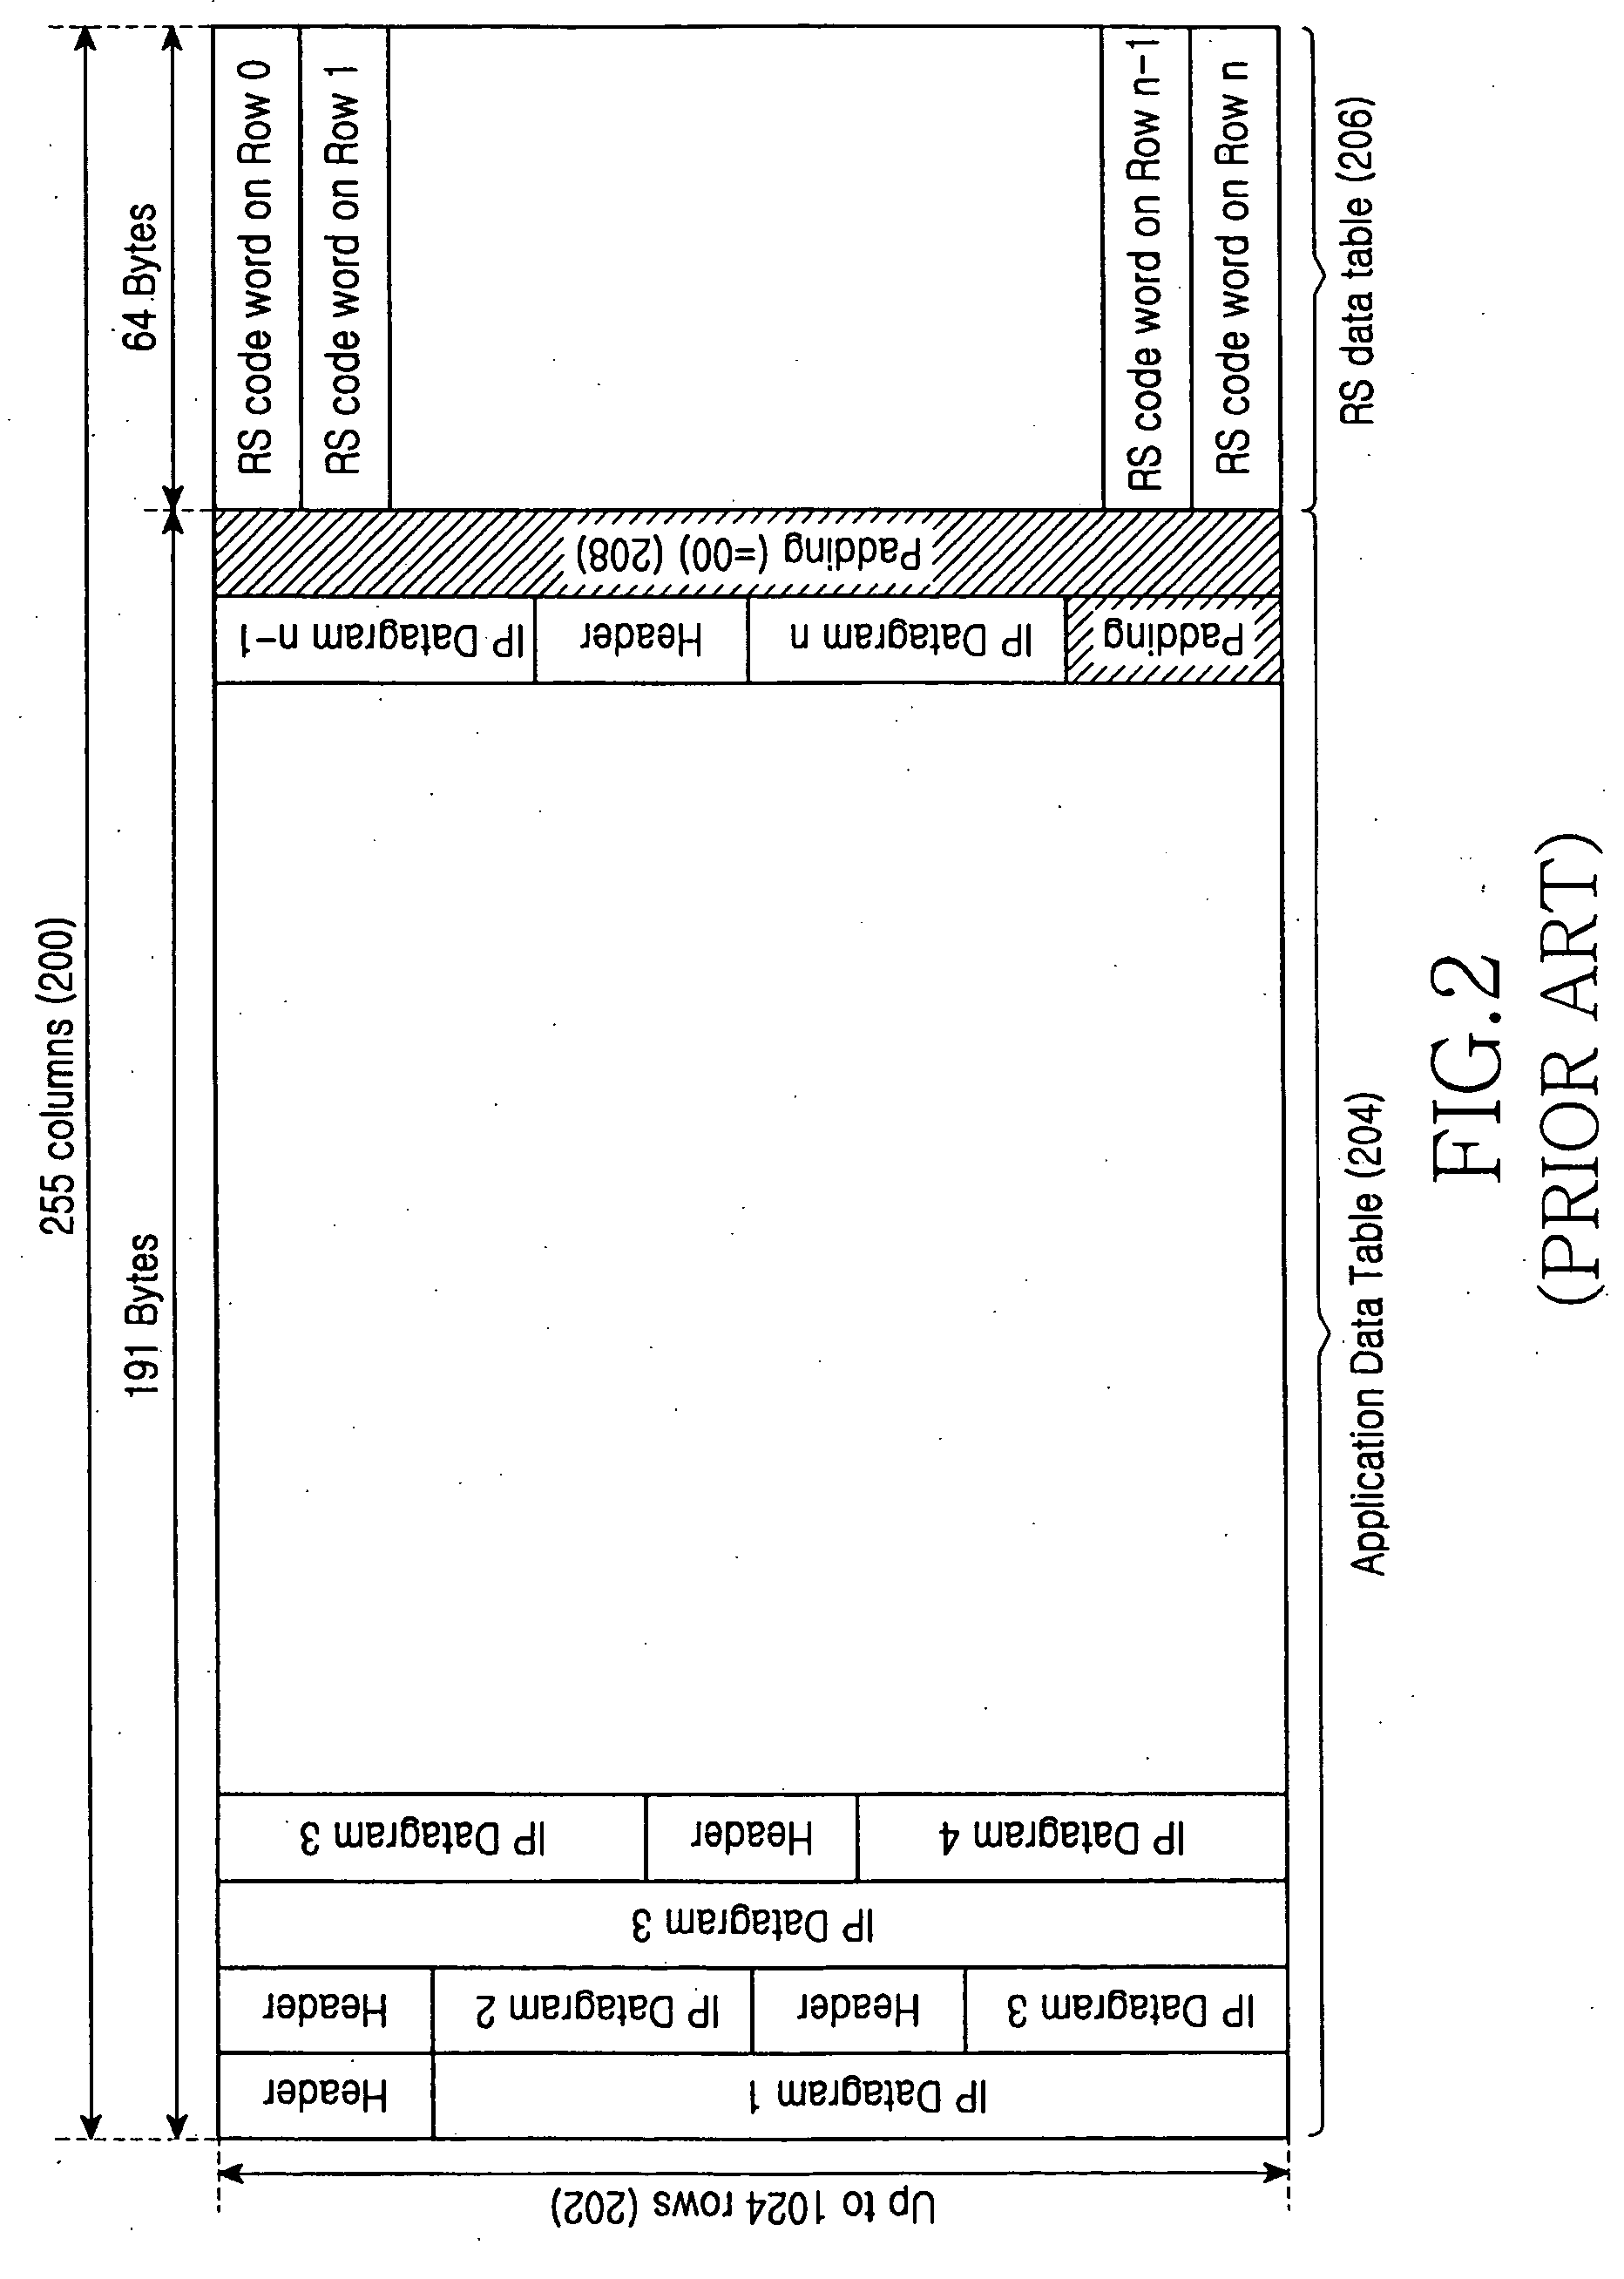 Apparatus and method of multi-cyclic redundancy checking for section detection and reliability information acquisition in a DVB-H system